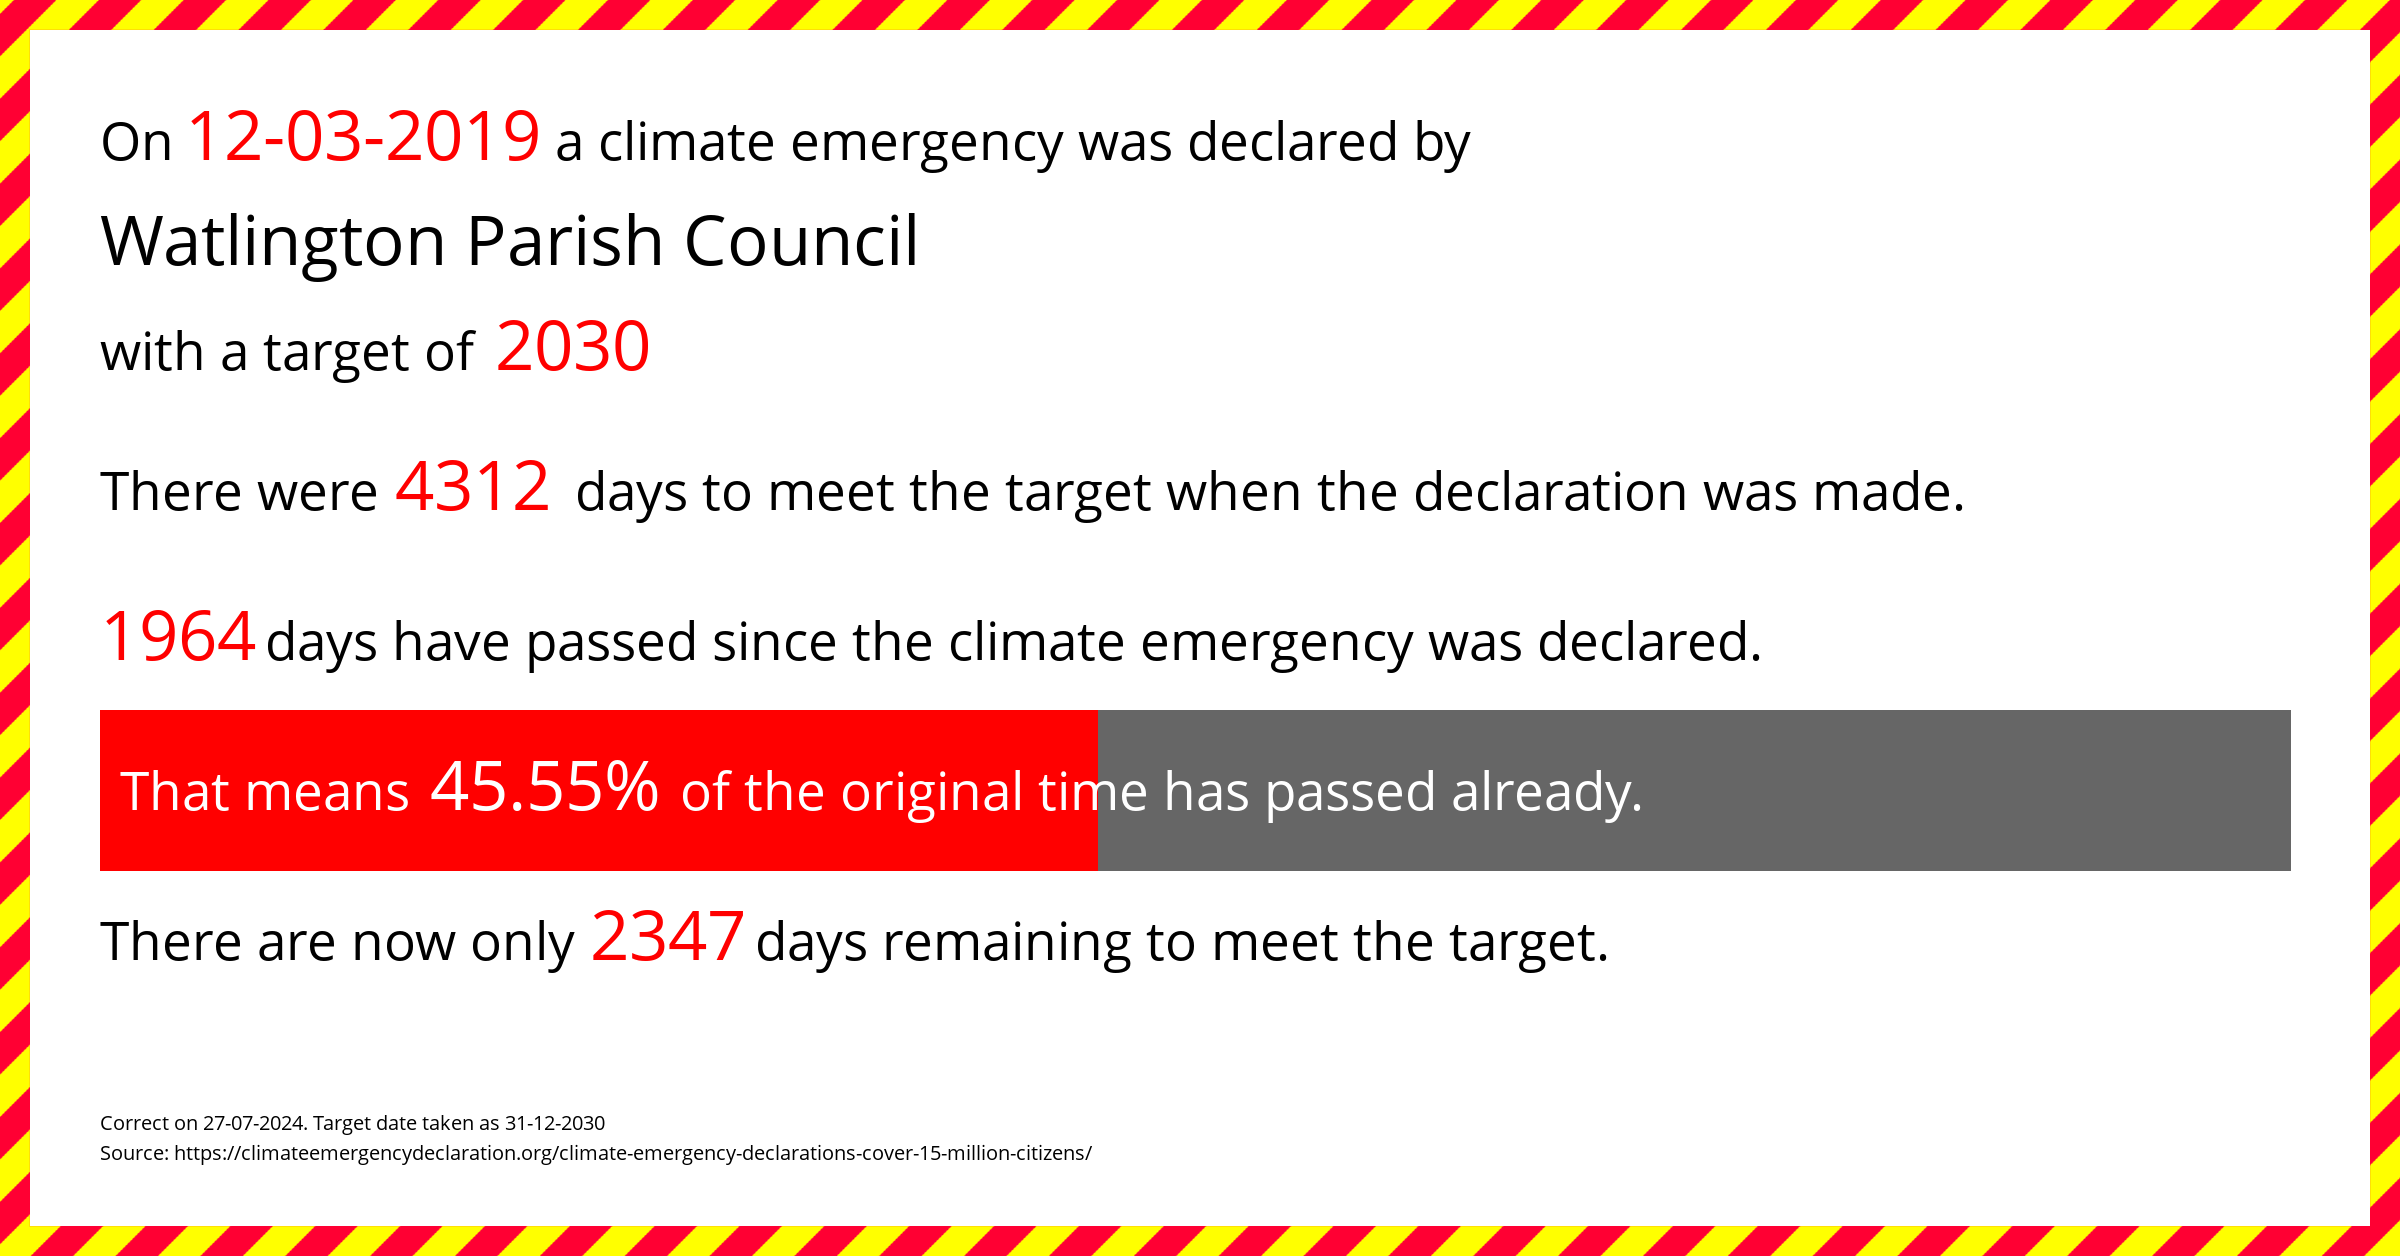 Watlington Parish Council declared a Climate emergency on Tuesday 12th March 2019, with a target of 2030.